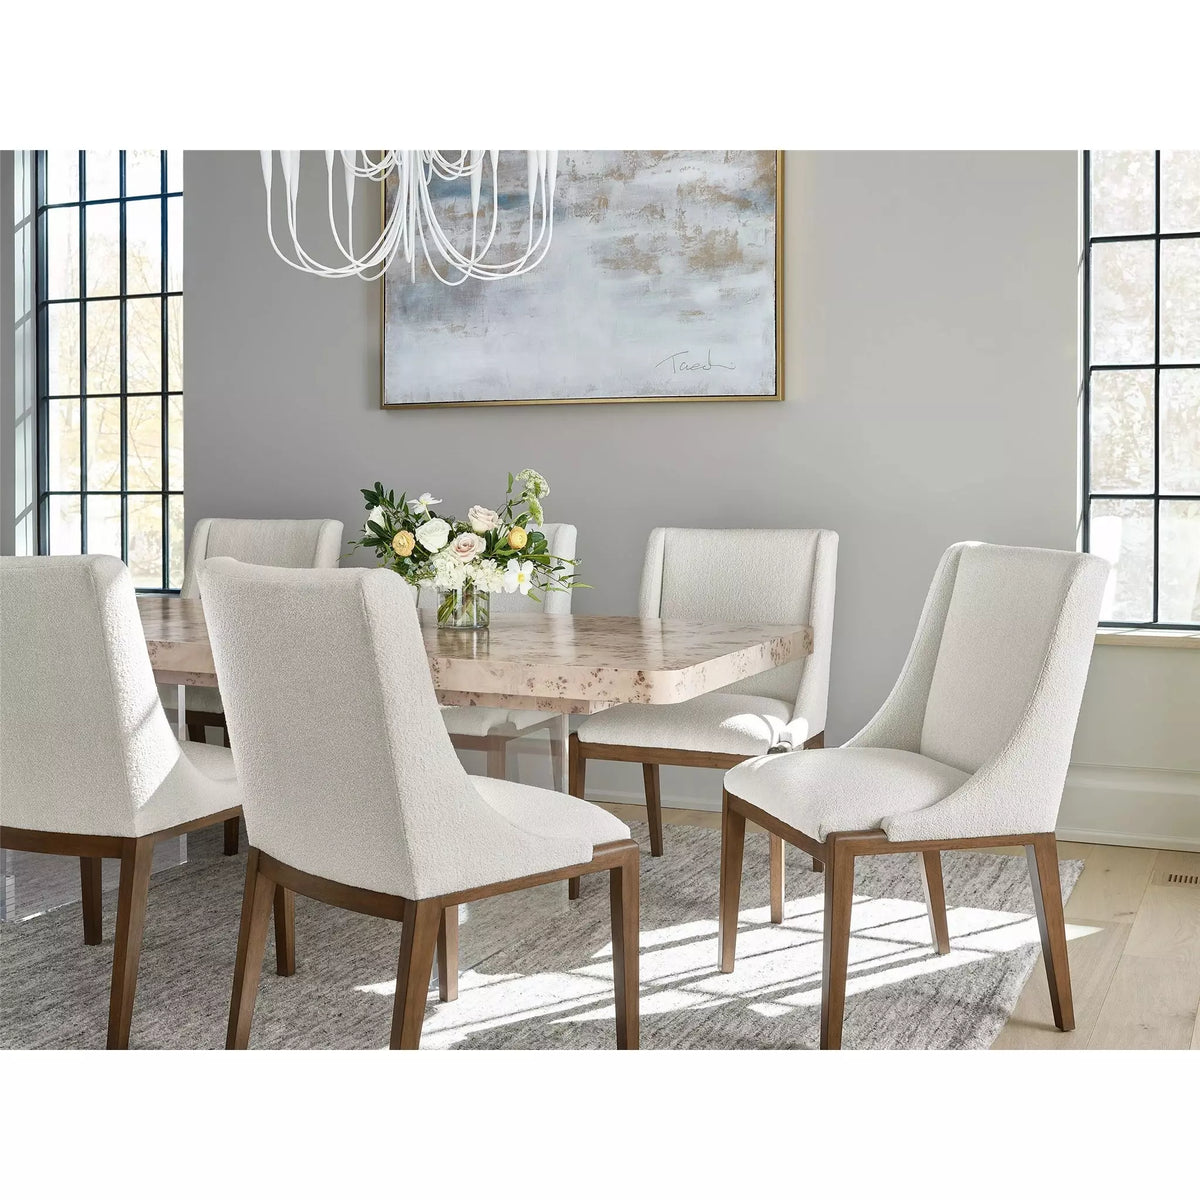 Tranquility Dining Chair - Be Bold Furniture